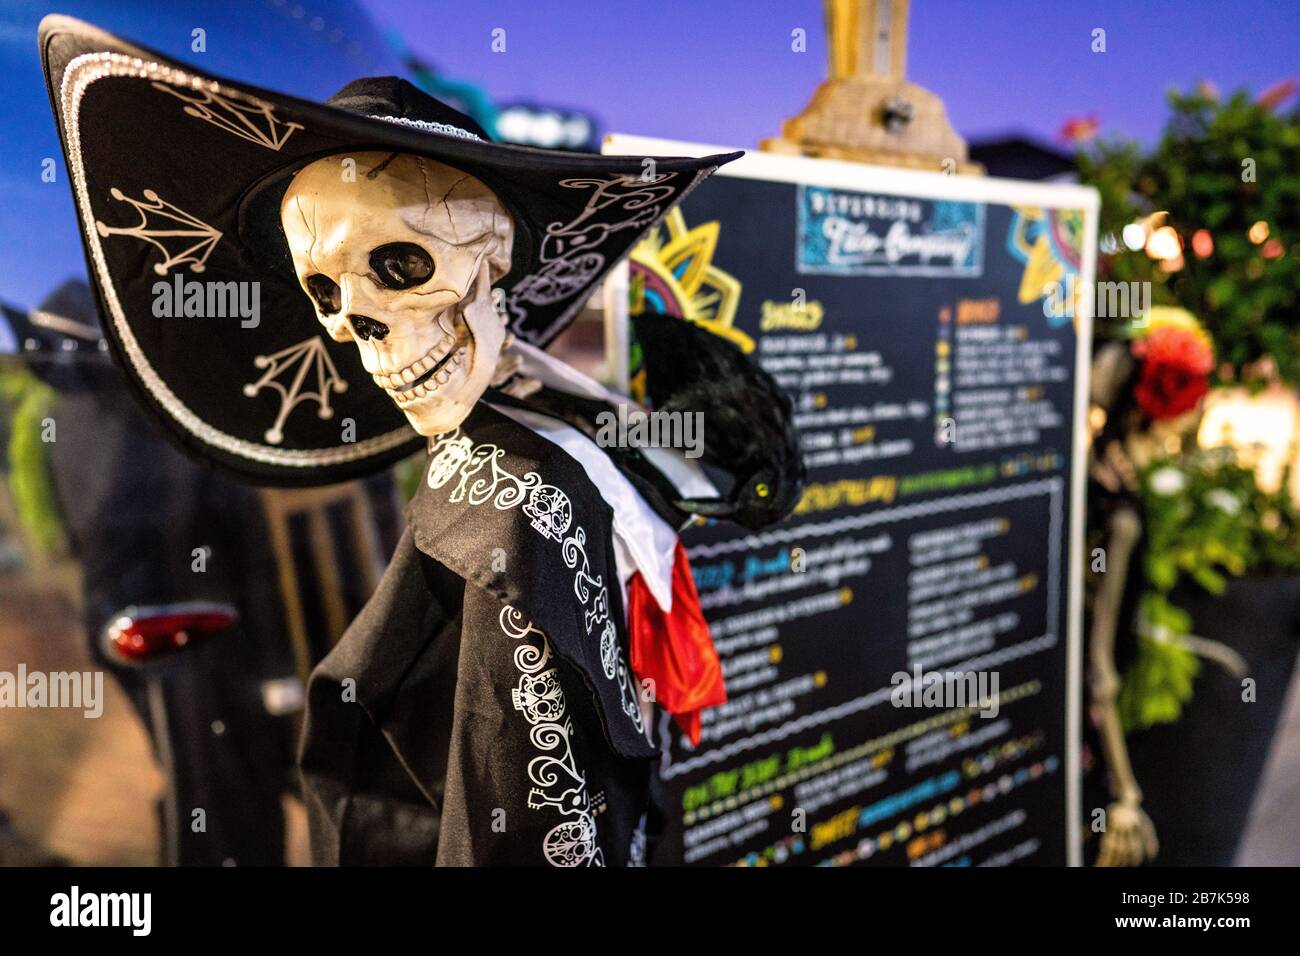 ALEXANDRIA, Virginia — Halloween decorations next to the menu board of a taco truck on the waterfront in Old Town, Alexandria, VA. Stock Photo